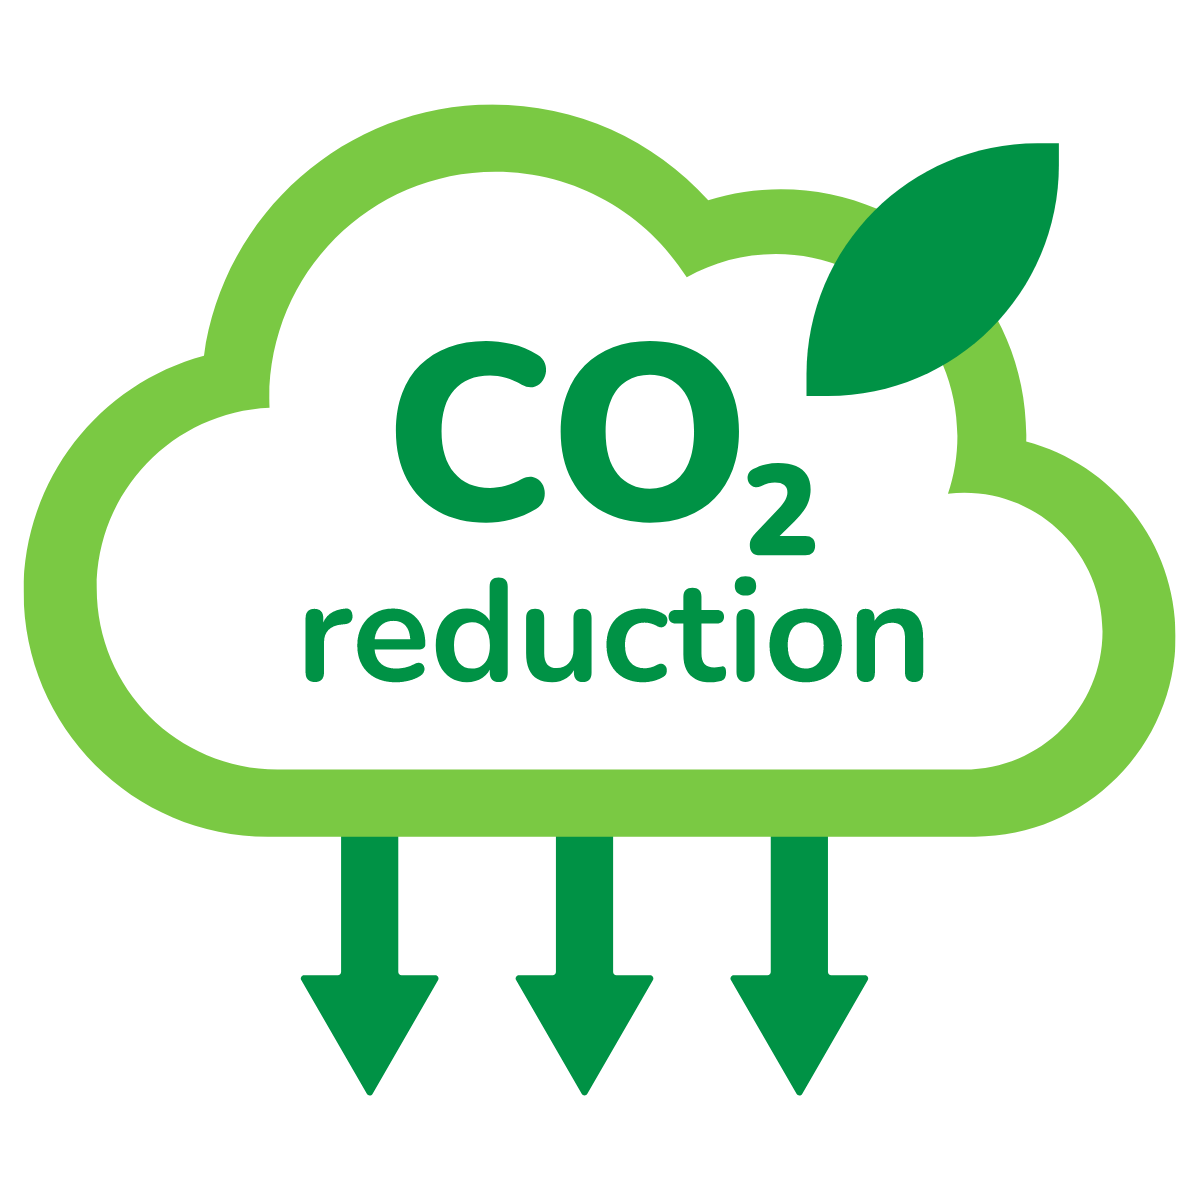 reduction-in-greenhouse-gas-emission